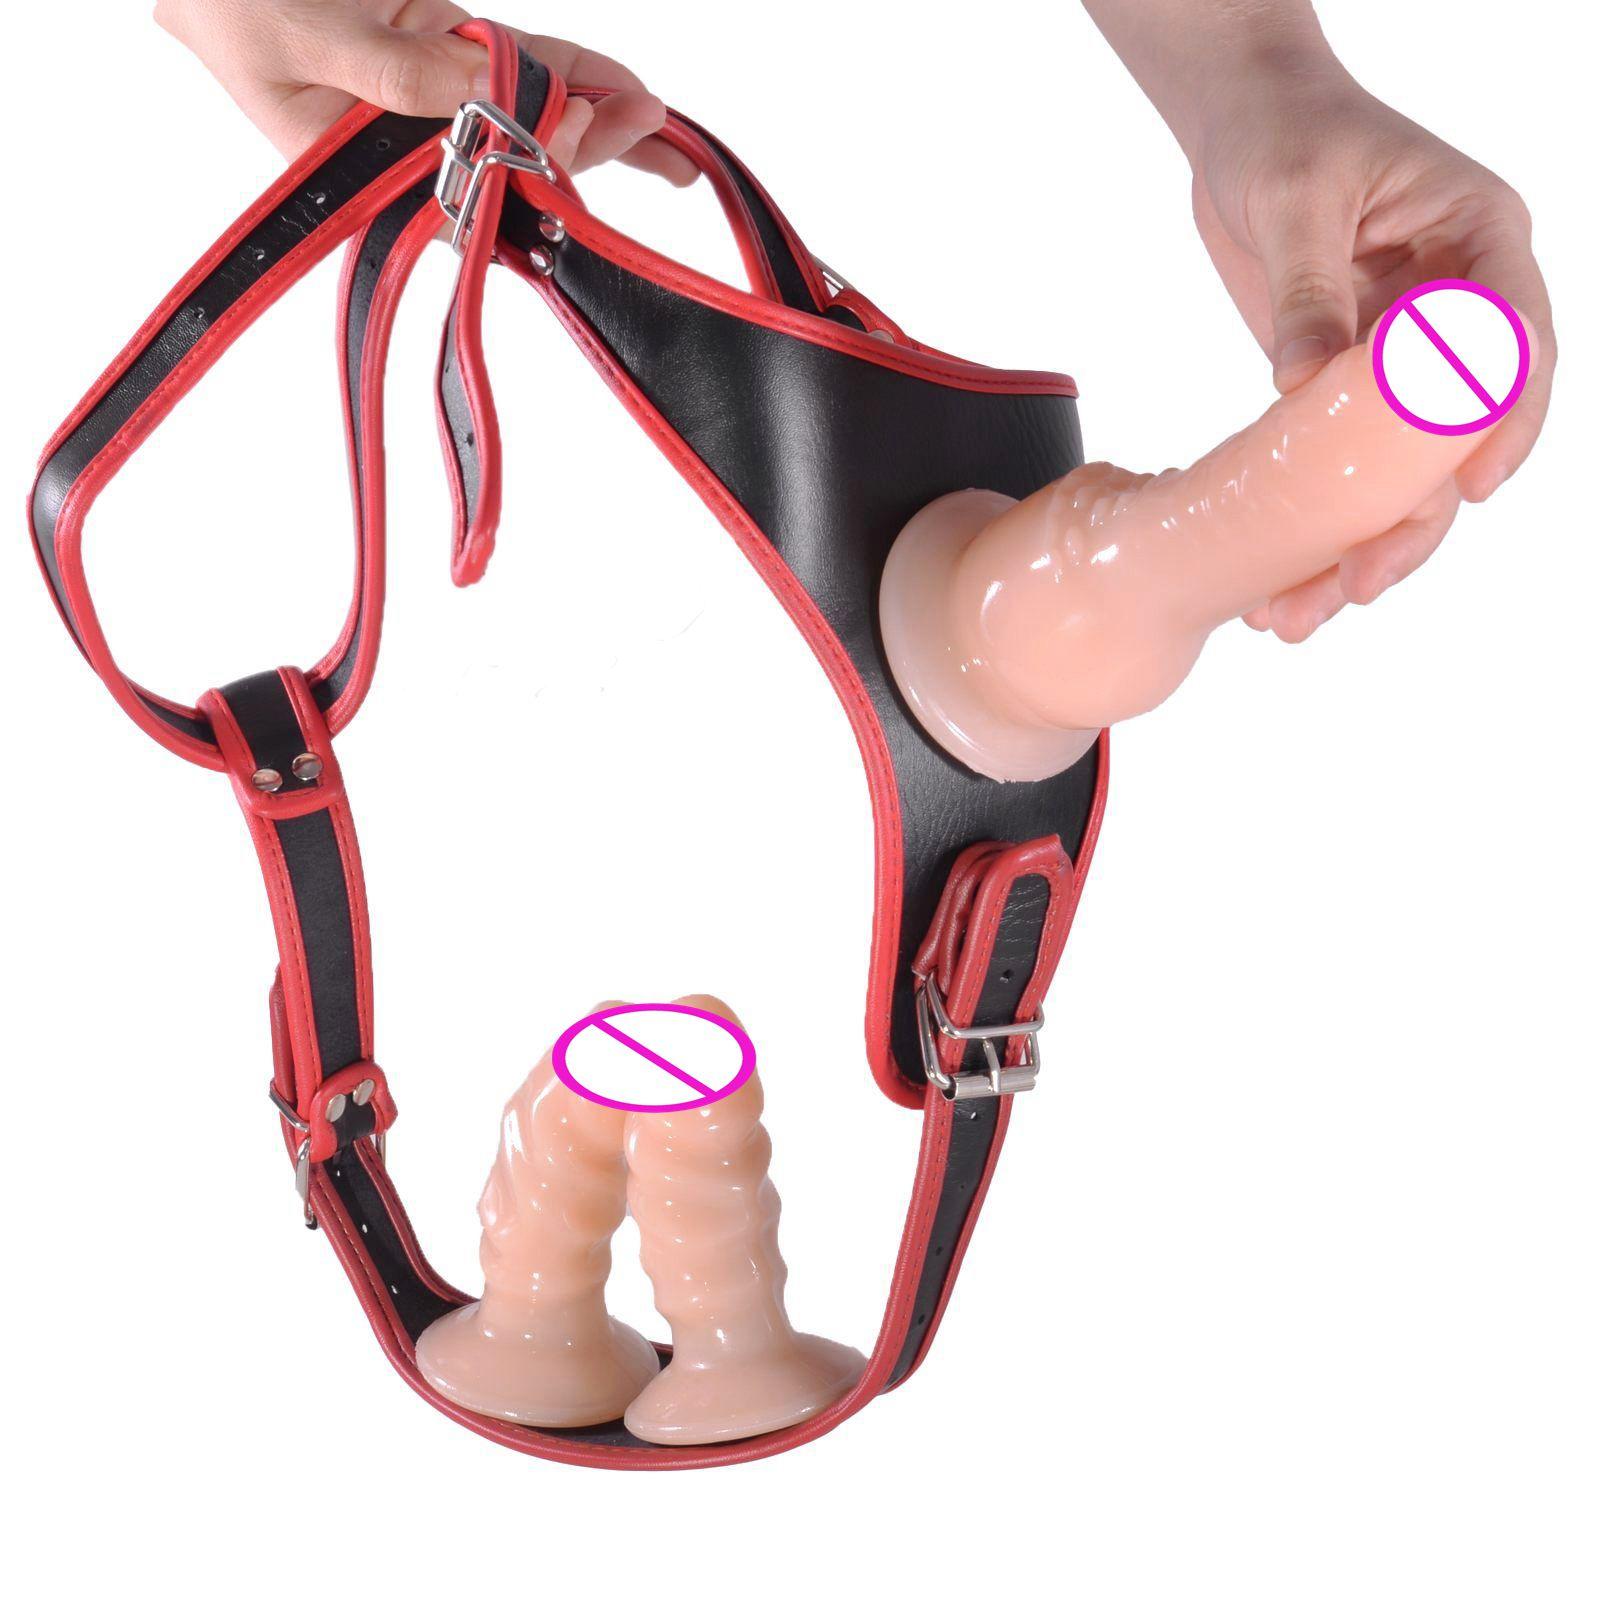 Three Heads Strap On Dildo Bundle Wearable Harness Panties Removeable Lesbian Dildo Vagina +anal Sex Toys For Women Couple